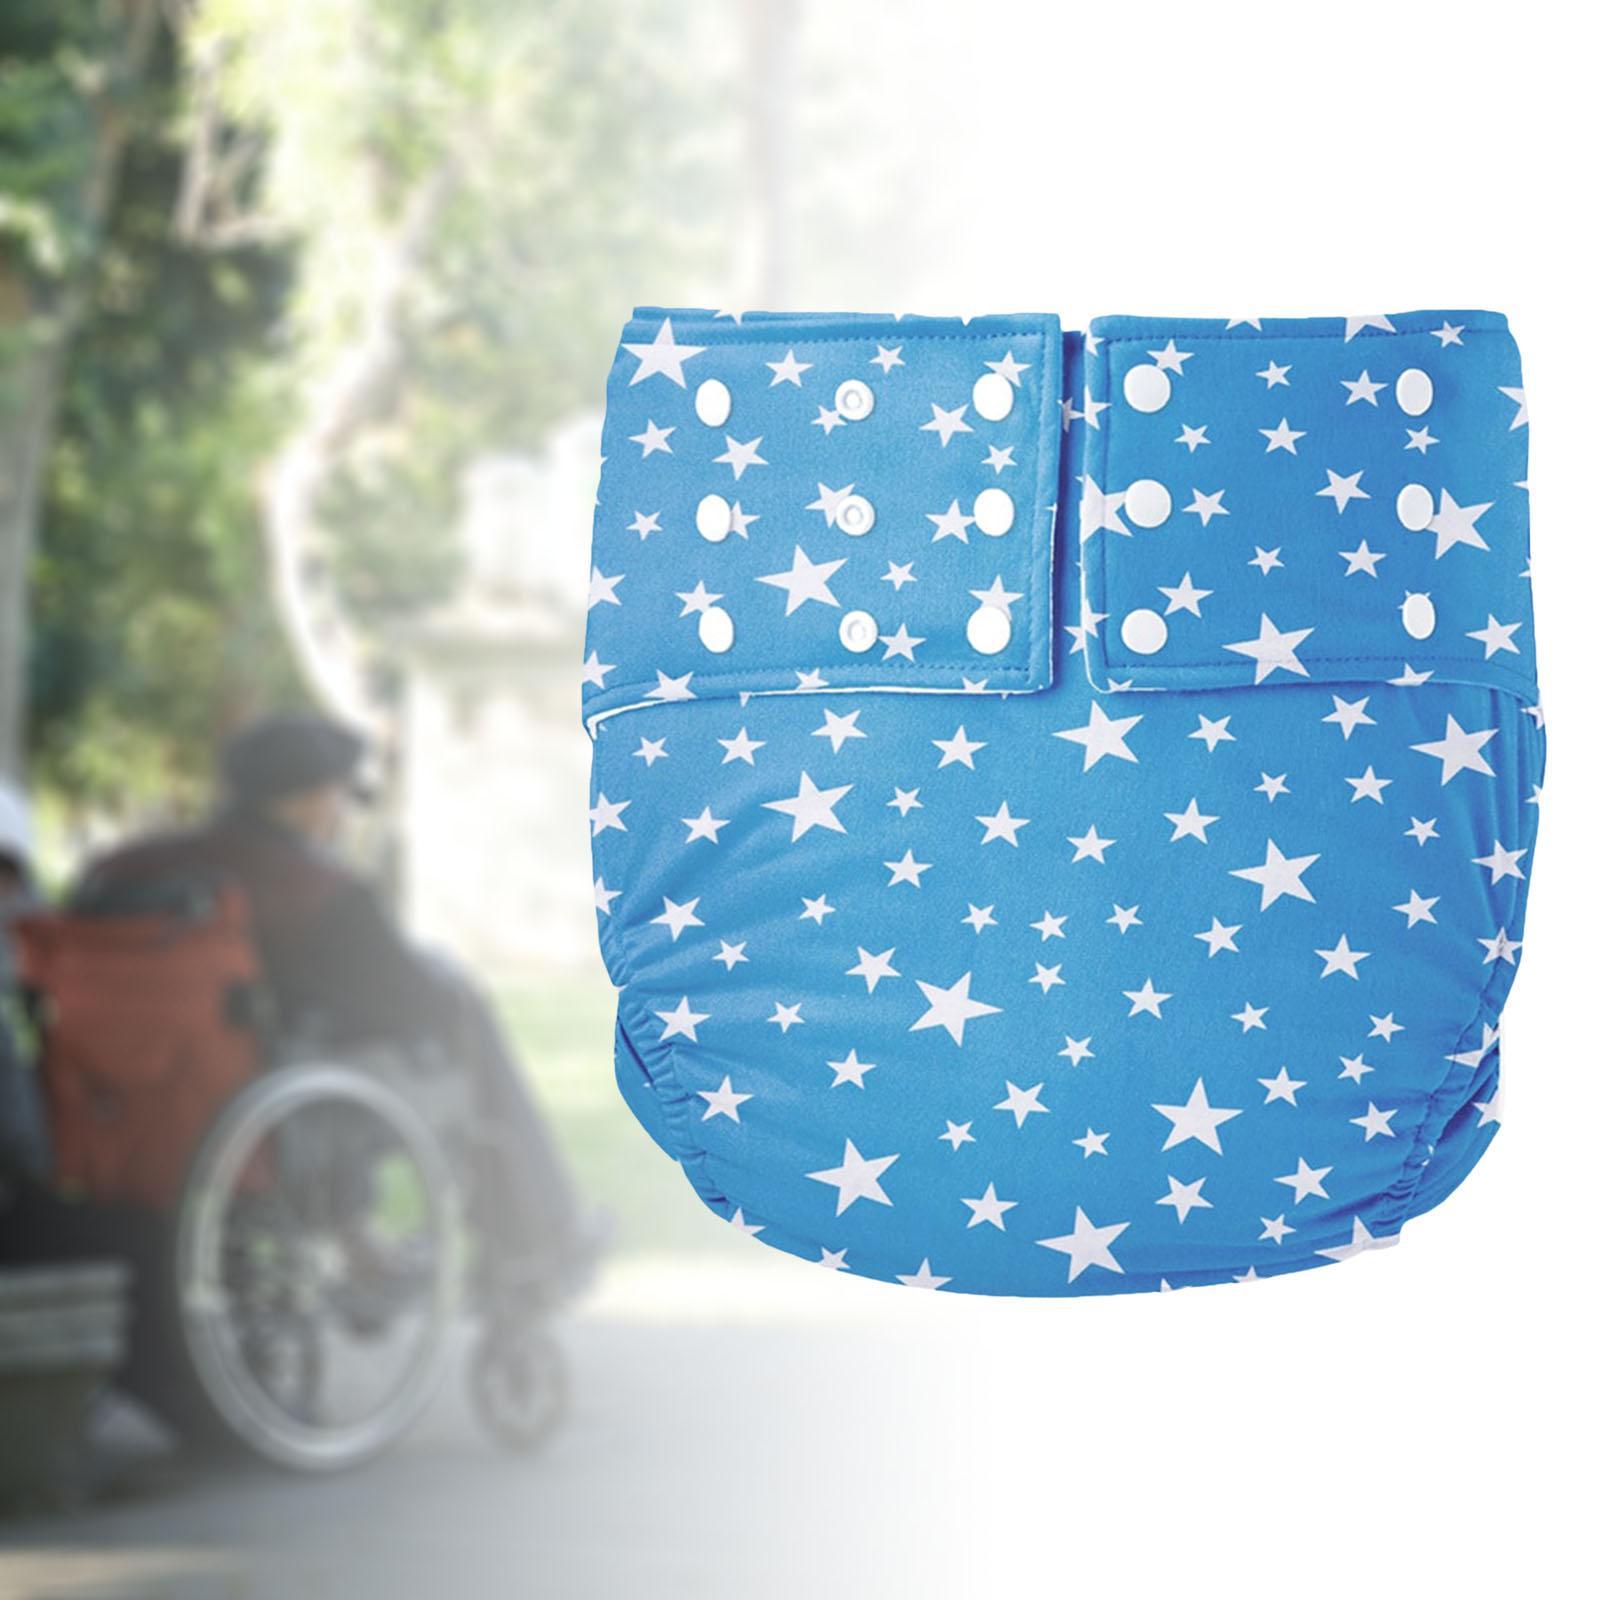 2Pcs Adjustable Adult Pocket Nappy Cover for Incontinence Washable